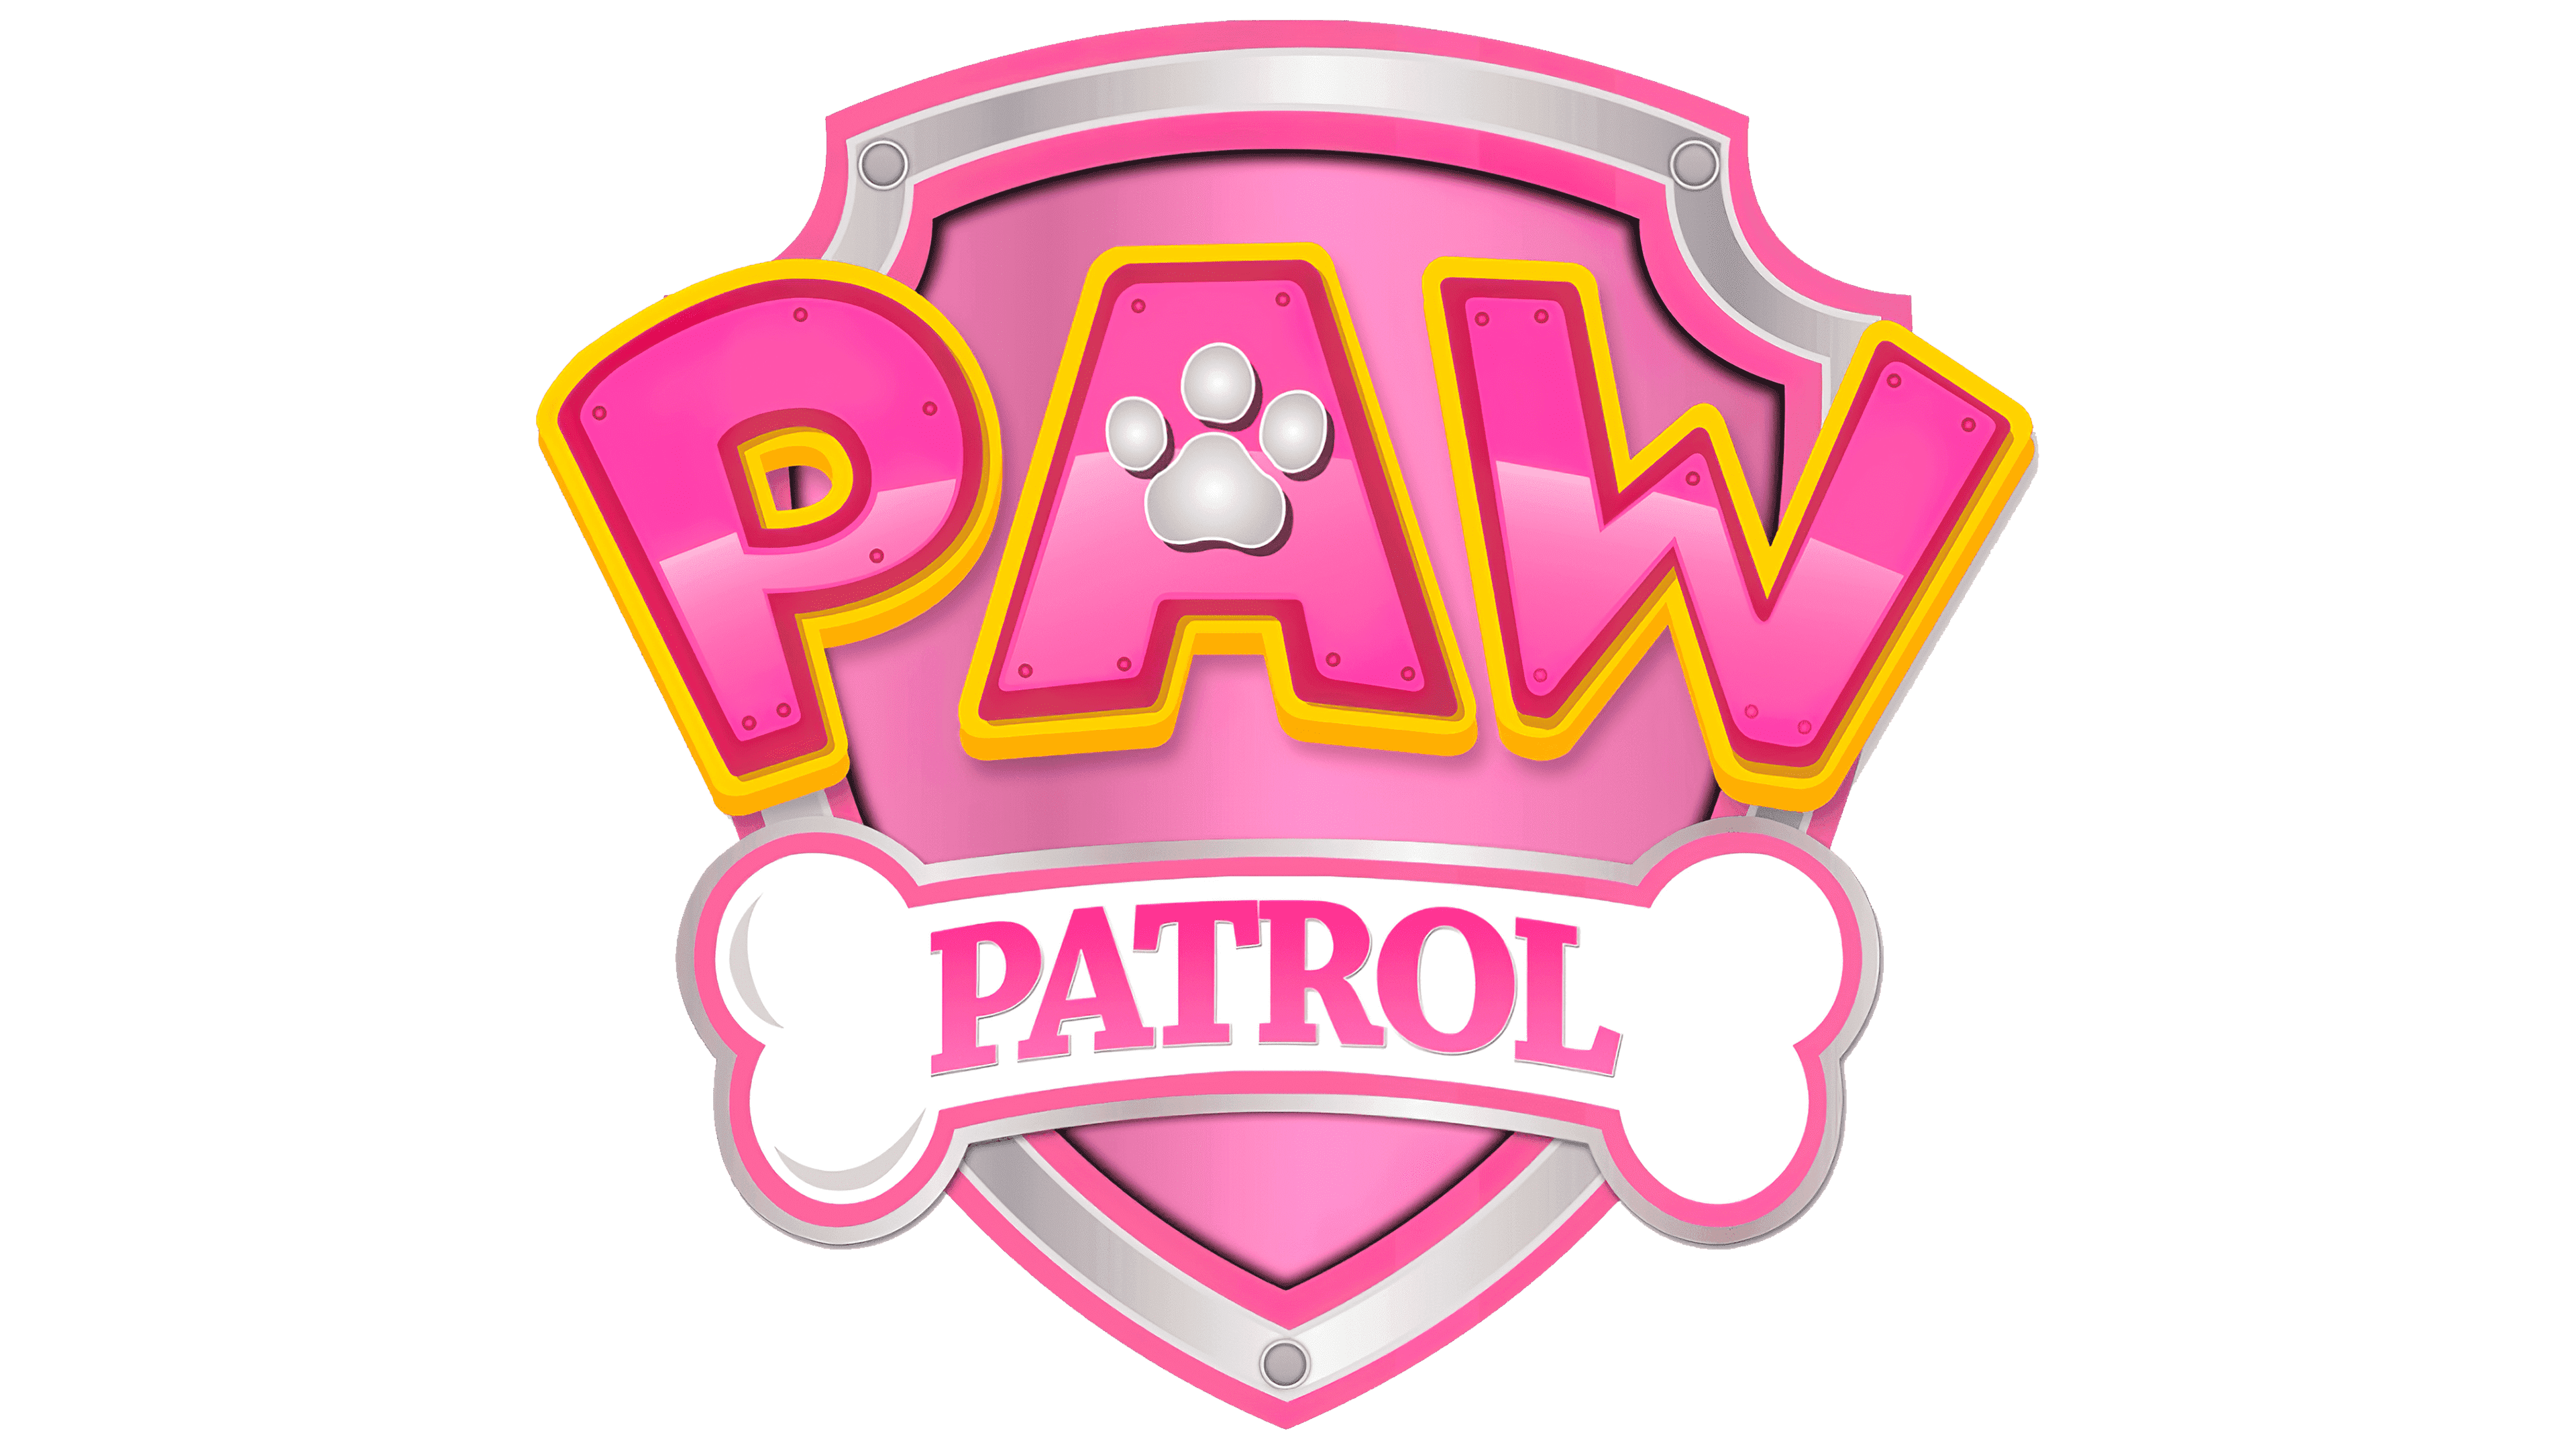 Paw Patrol Logo S Mbolo Significado Logotipo Historia Png The Best